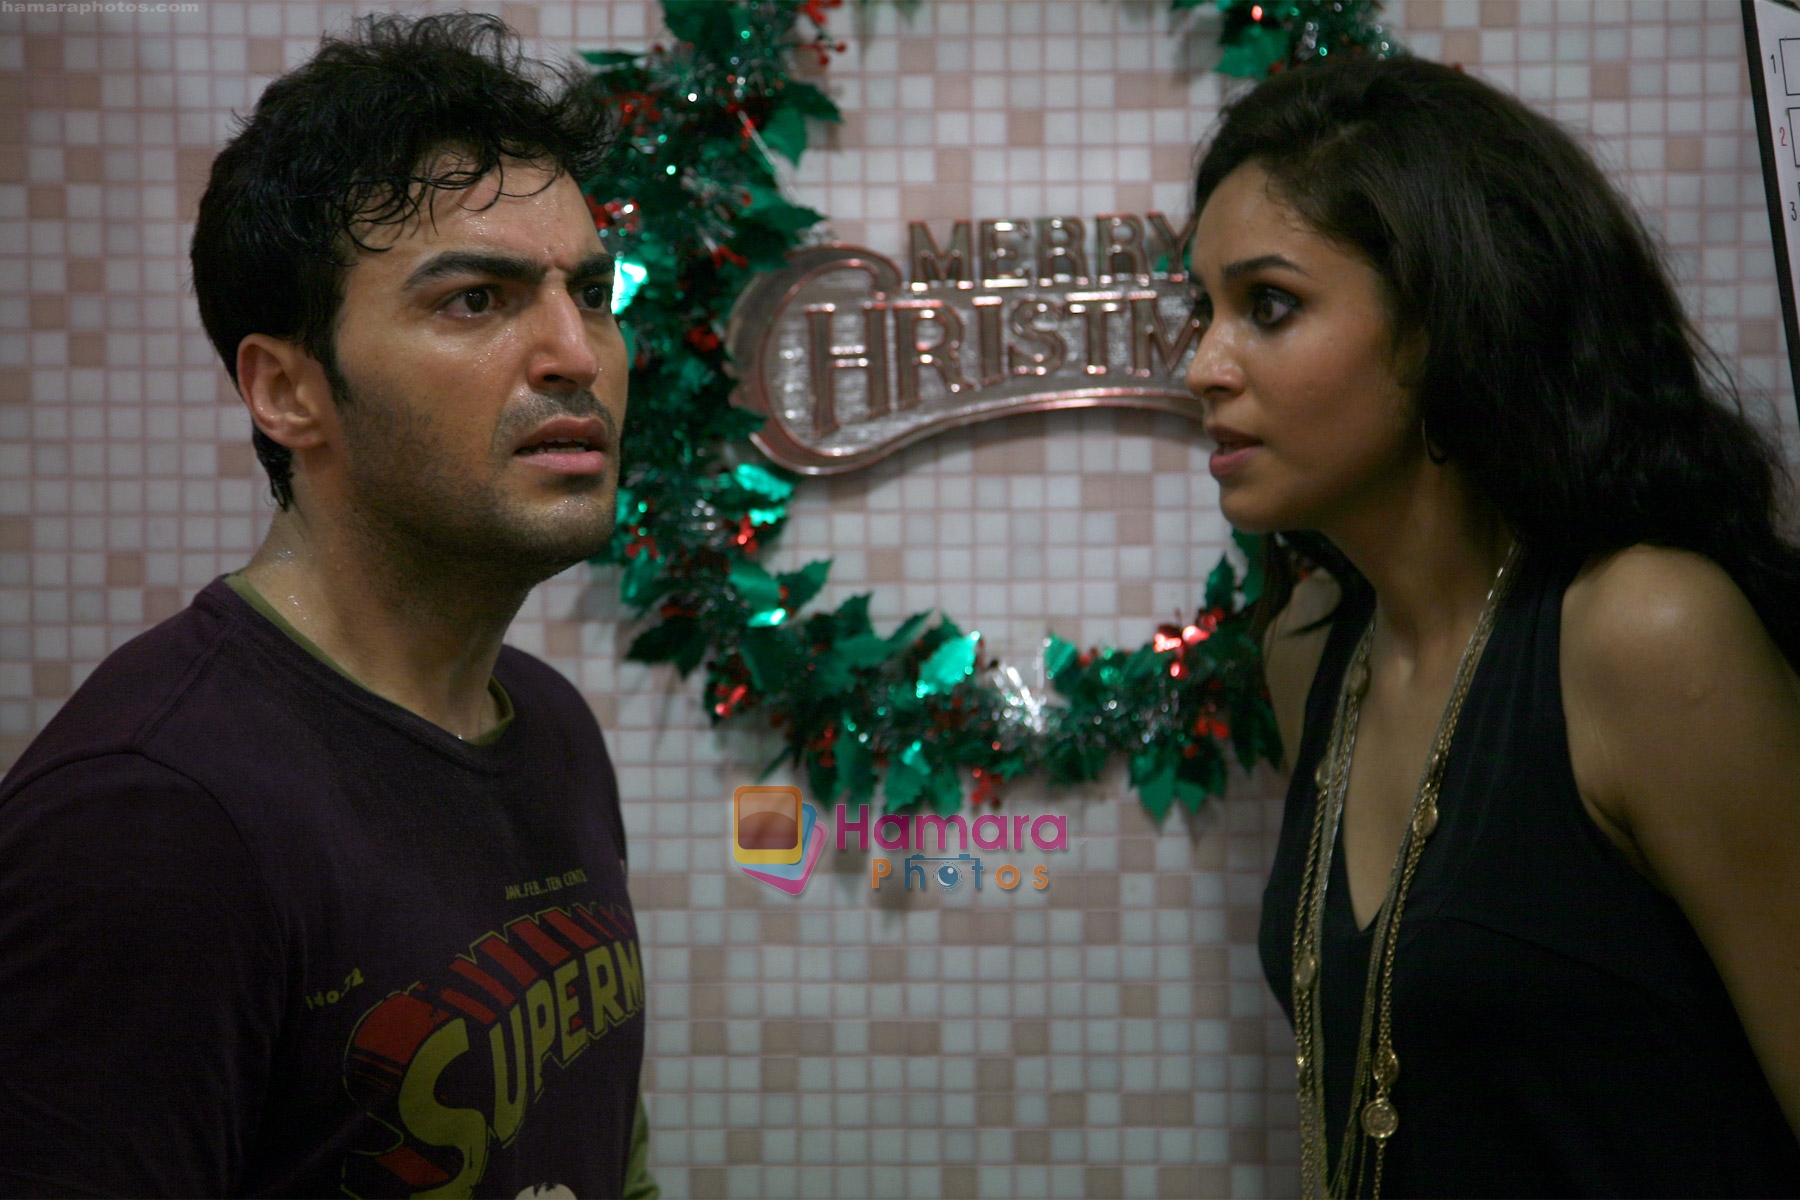 Ayaz Khan and Amruta Patki in the still from movie Hide and Seek